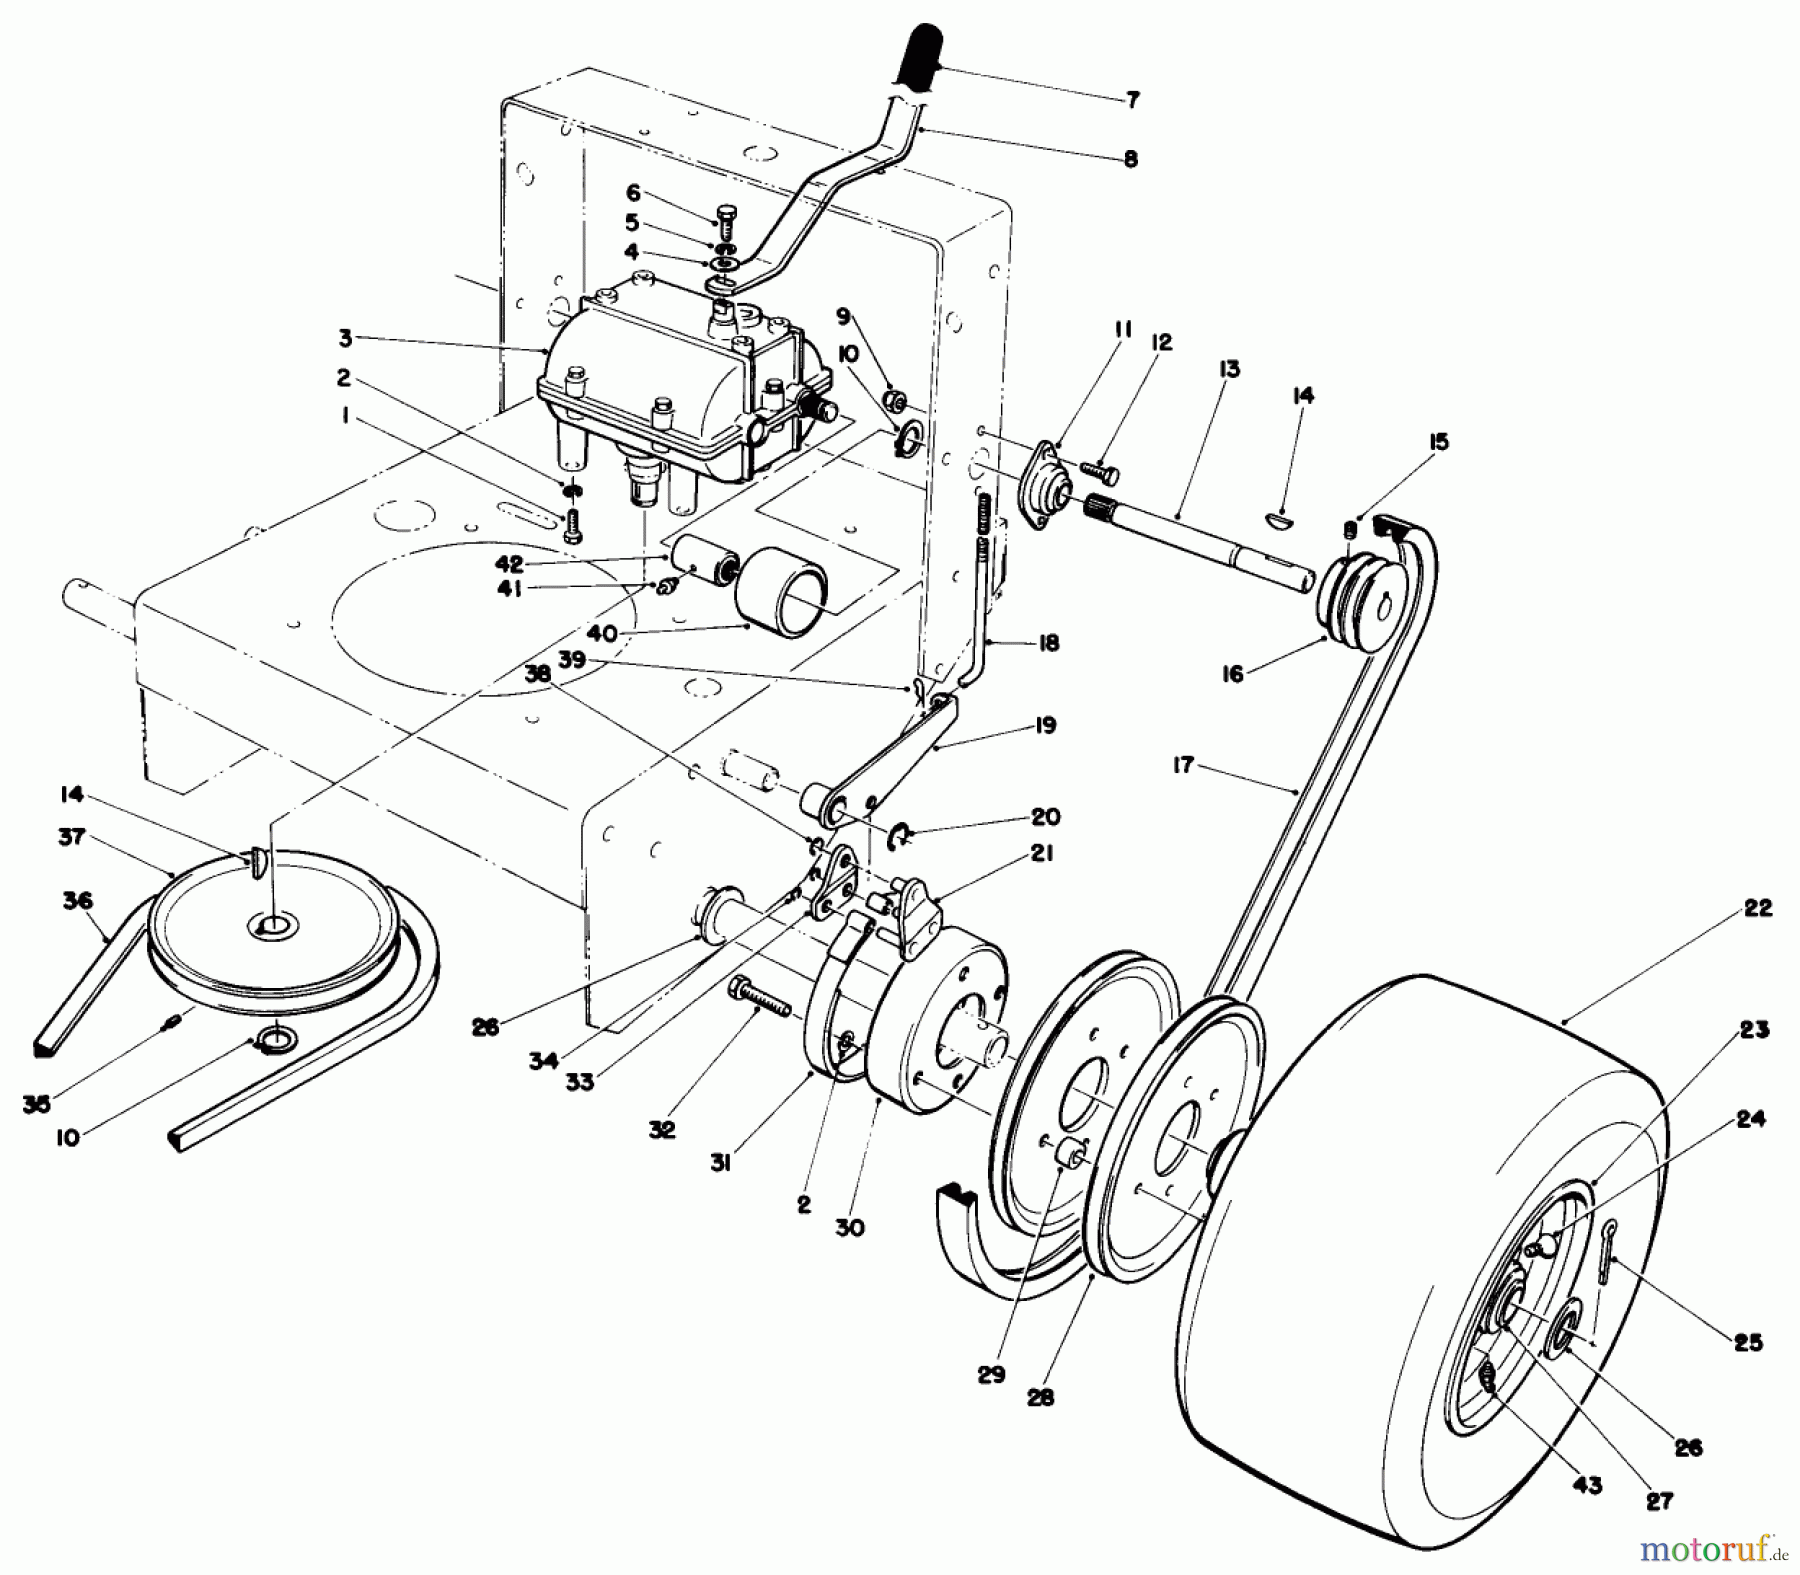  Toro Neu Mowers, Drive Unit Only 30116 - Toro Mid-Size Proline Gear Traction Unit, 16 hp, 1988 (8000001-8999999) AXLE ASSEMBLY